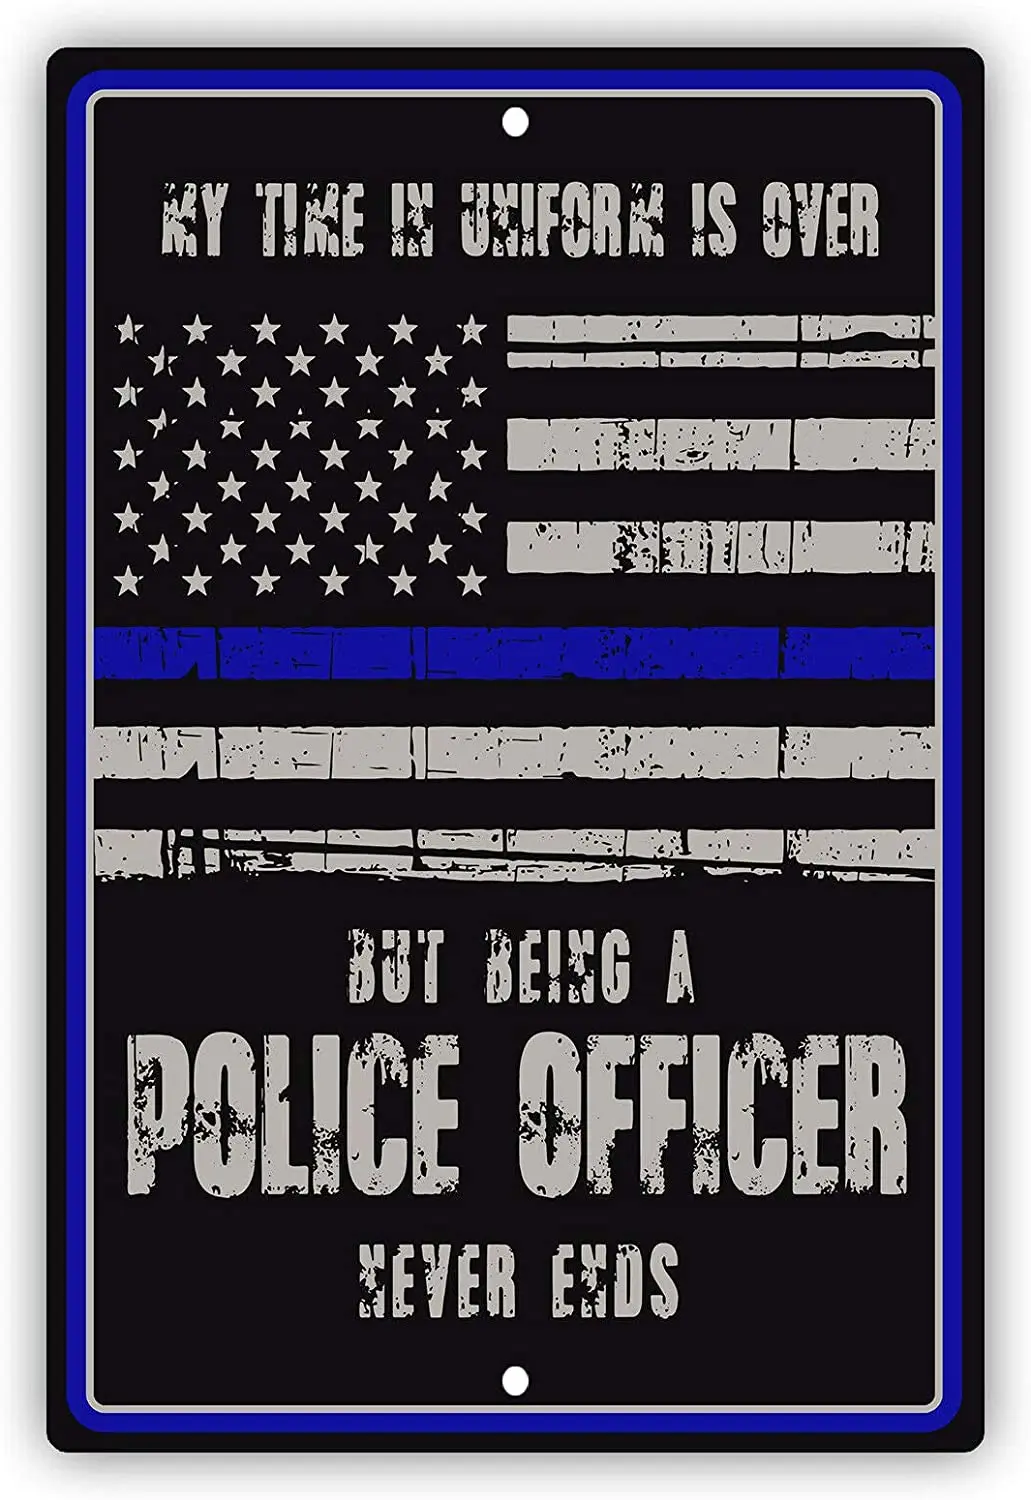 

Afterprints My Time in Uniform is Over But Being A Police Officer Never Unique Novelty Warning Notice Aluminum Metal Sign 8"x12"